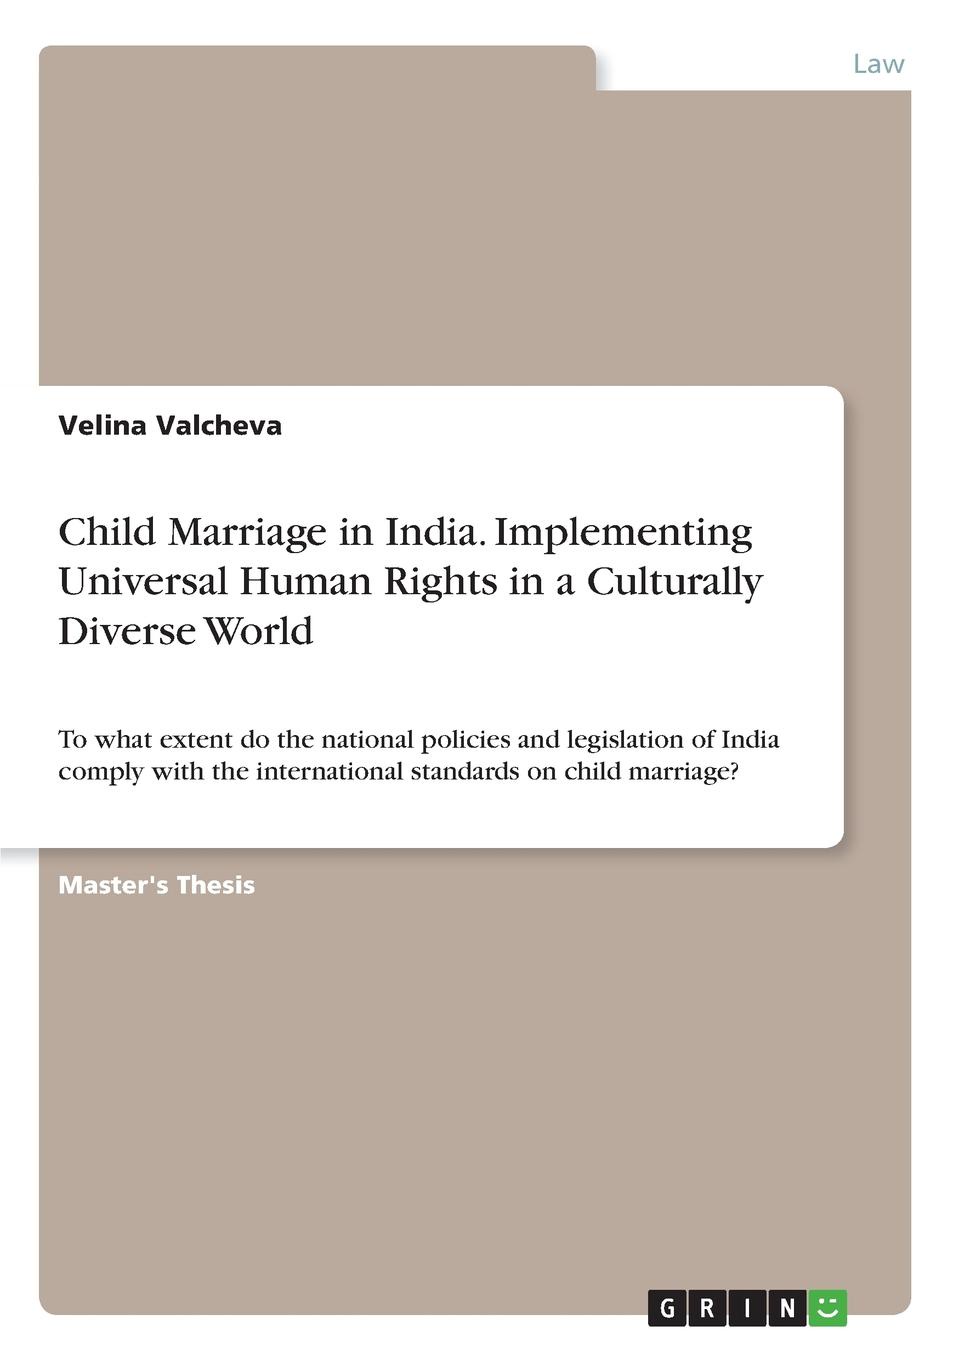 Velina Valcheva Child Marriage in India. Implementing Universal Human Rights in a Culturally Diverse World